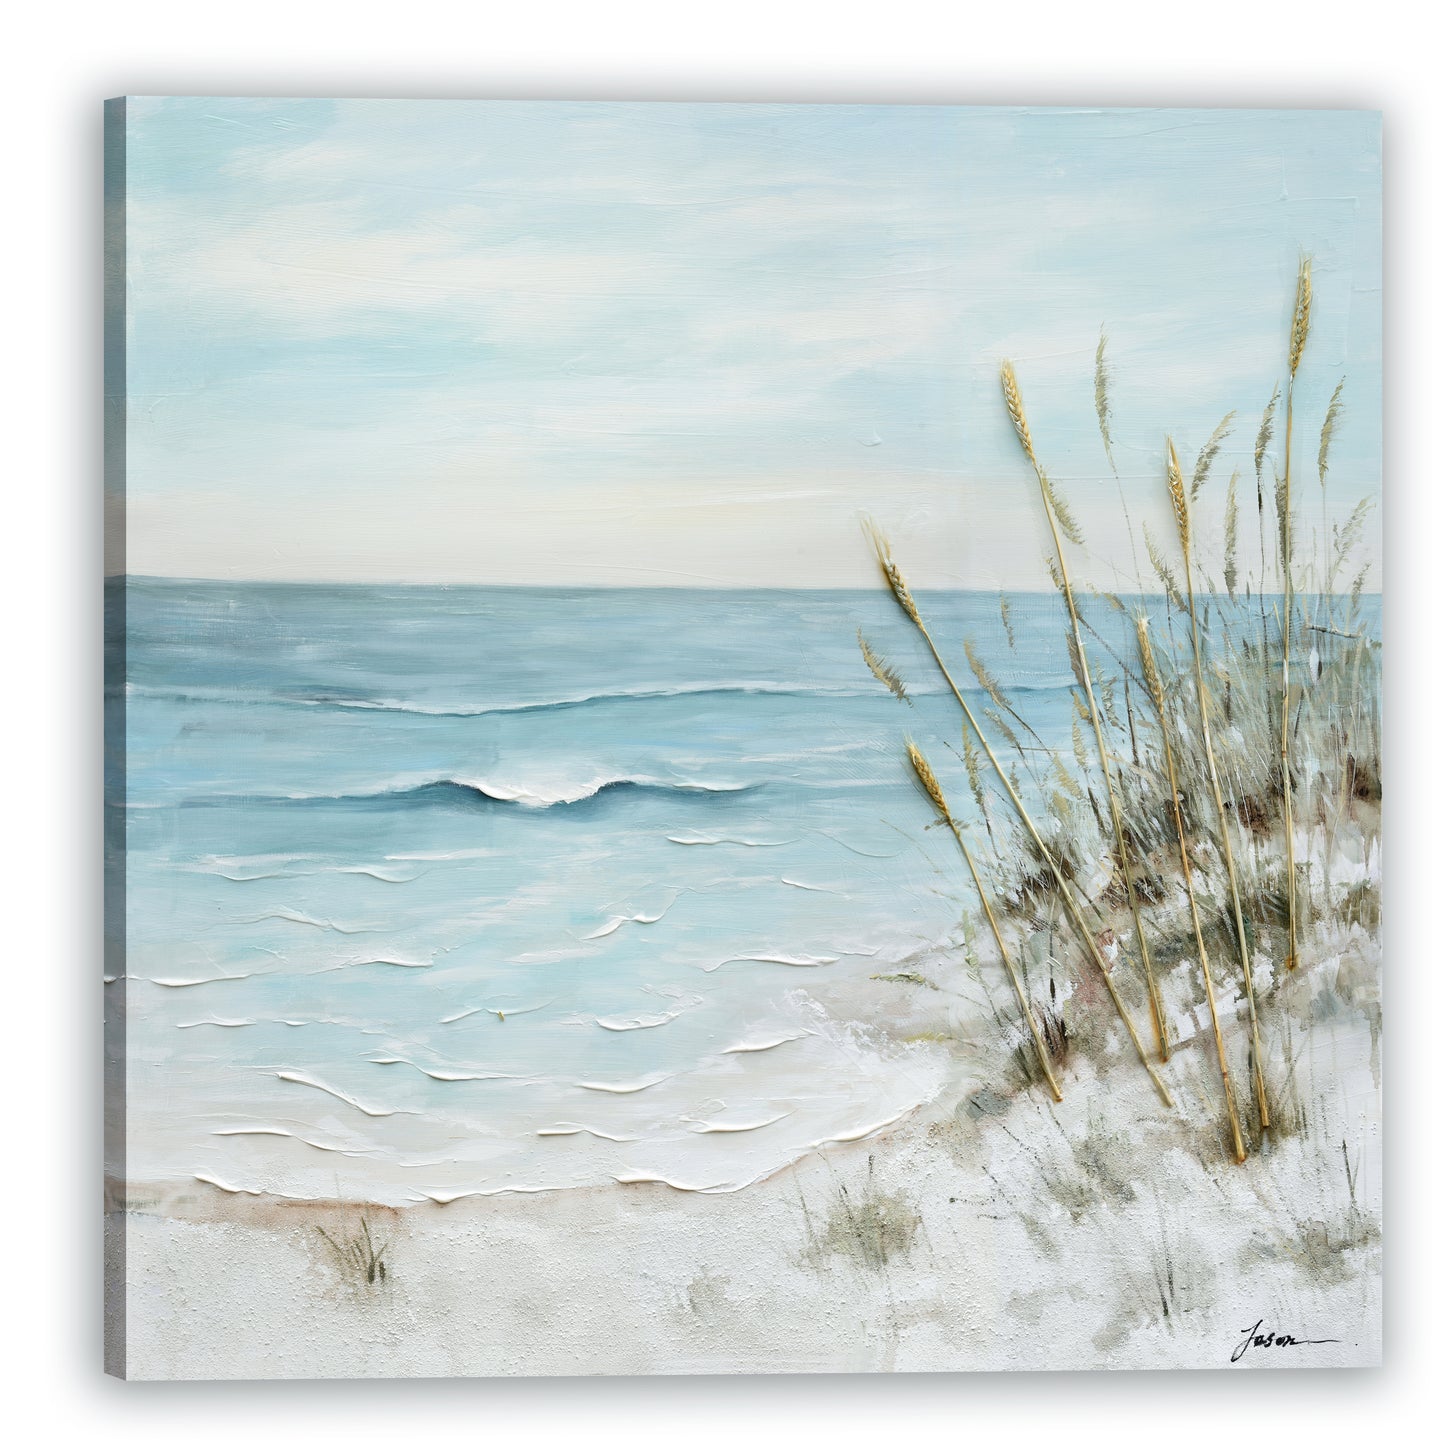 Reeds on the beach - Oil Painting on Wrapped Canvas. wall art, canvas artwork for living room, bedroom, office